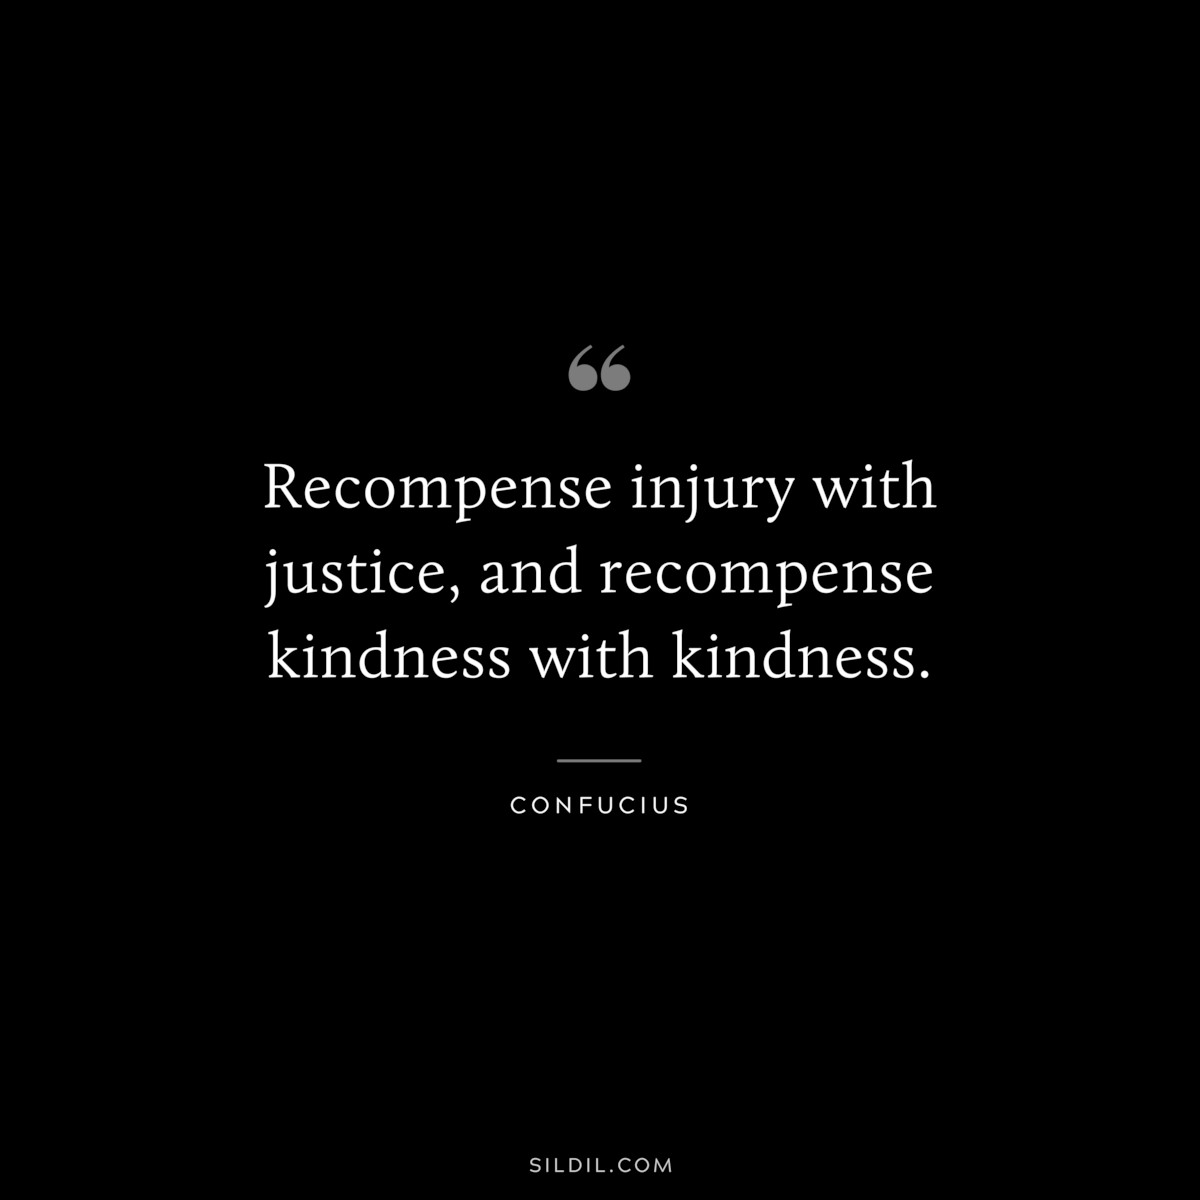 Recompense injury with justice, and recompense kindness with kindness. ― Confucius